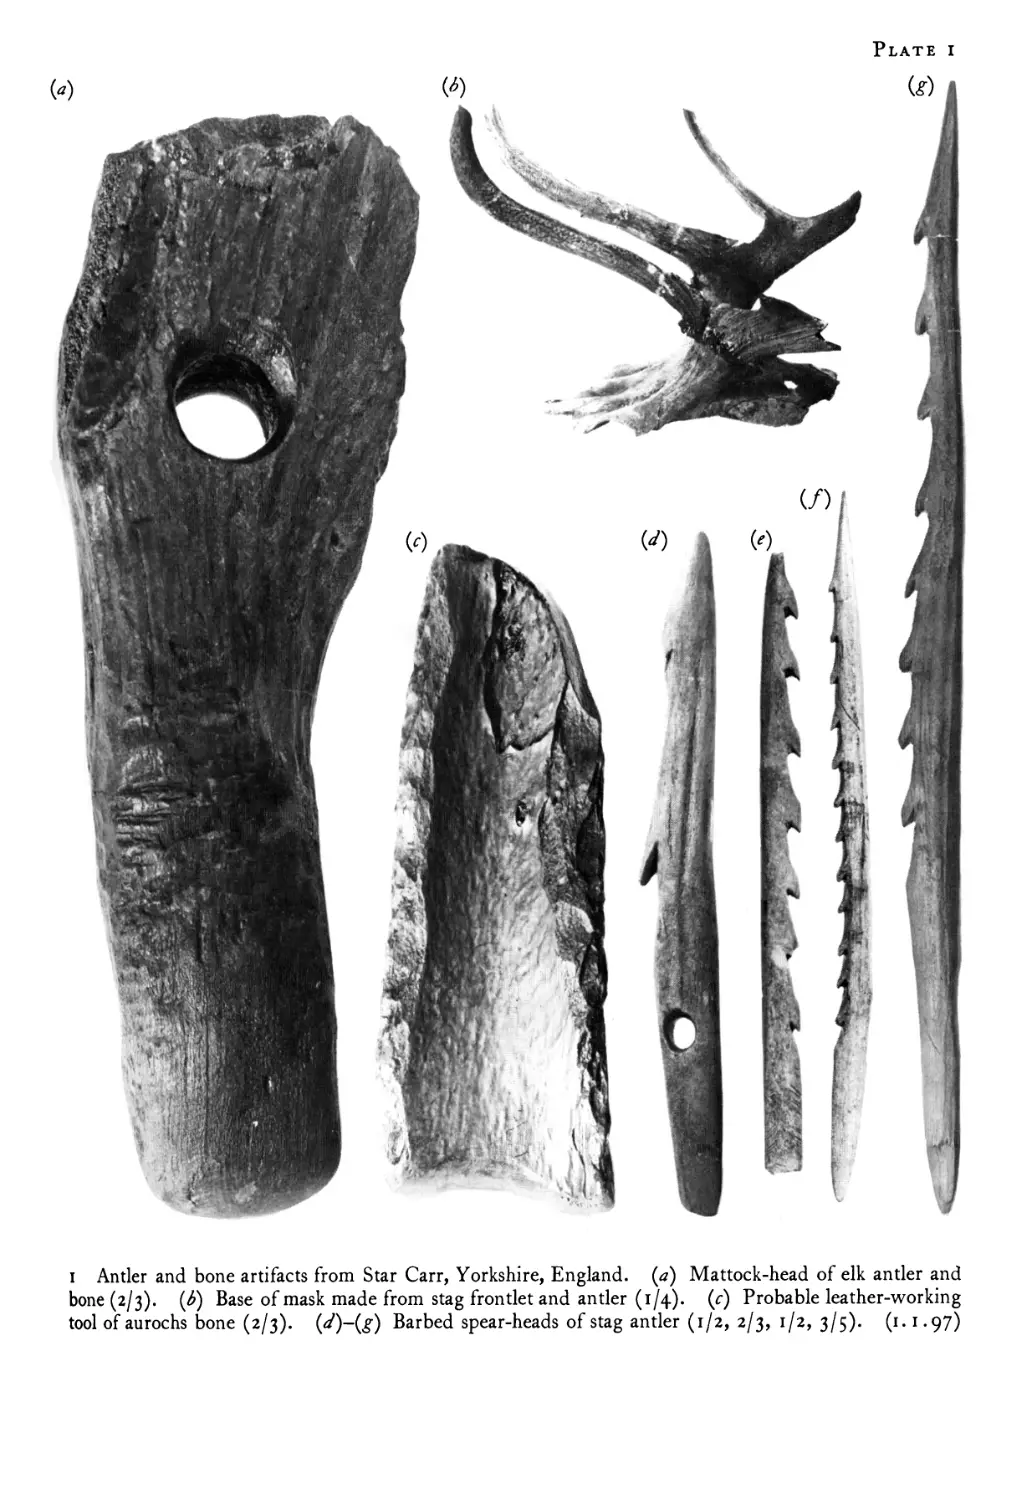 PRIMITIVE MAN IN EUROPE IN MESOLITHIC TIMES